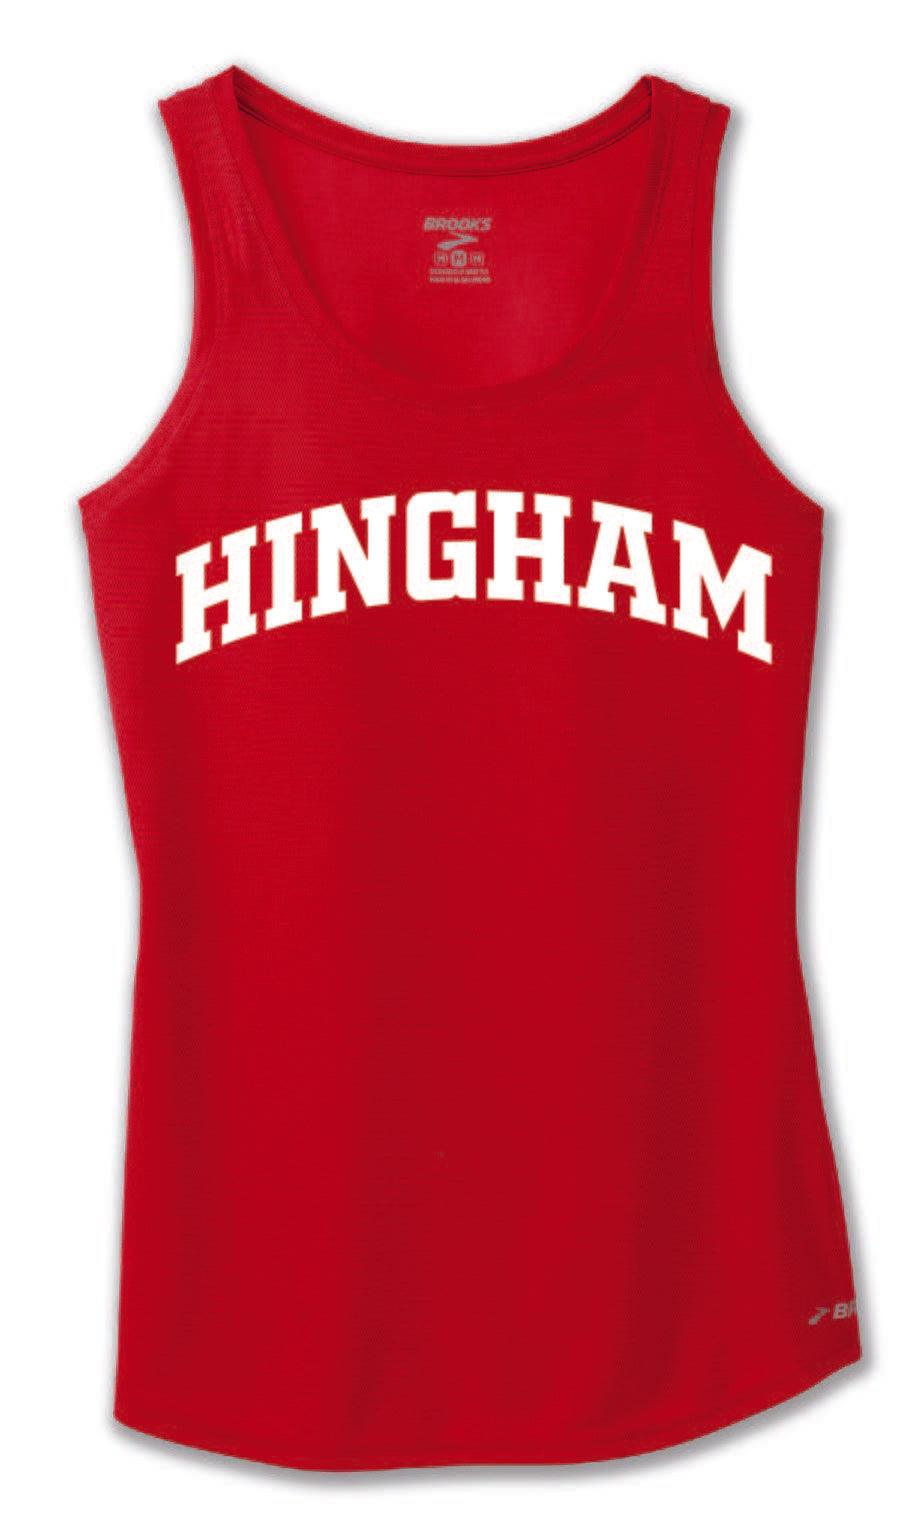 Hingham Track and Field Womens Team Singlets (221311)